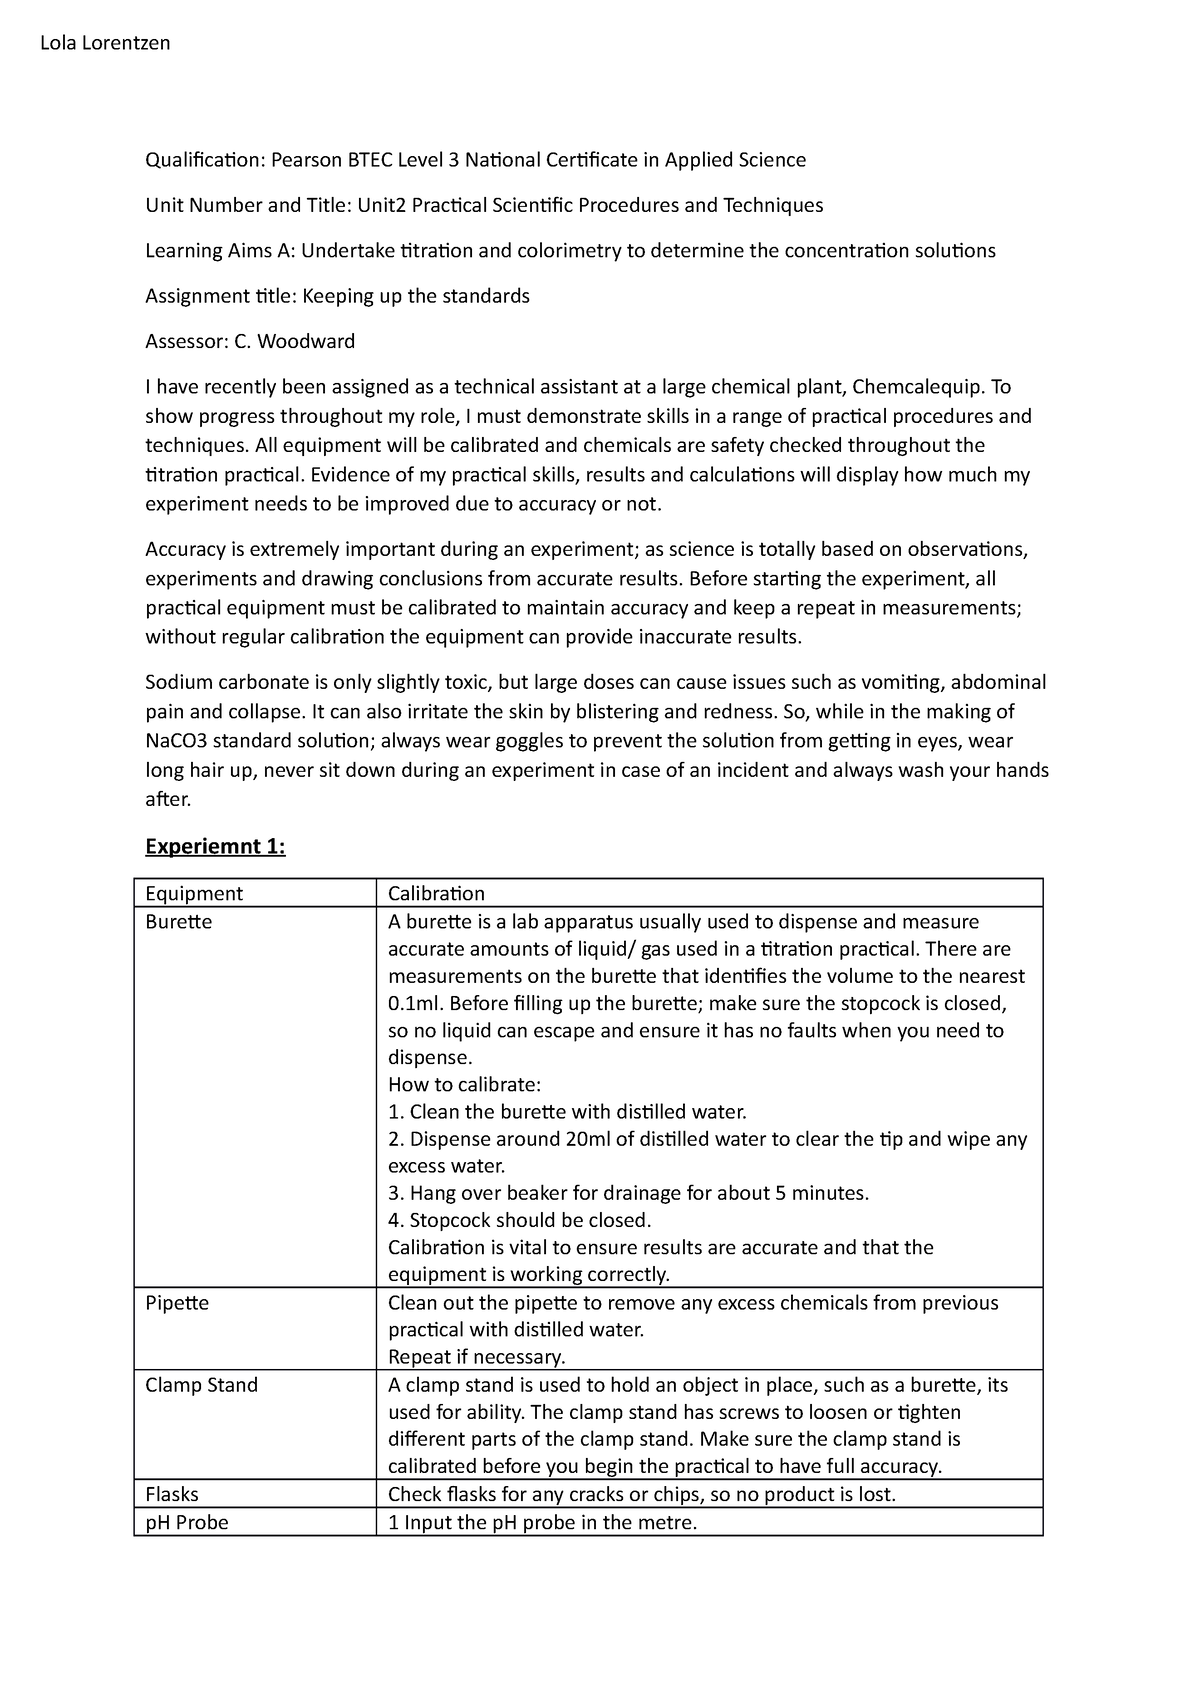 btec applied science level 3 unit 13 assignment 1